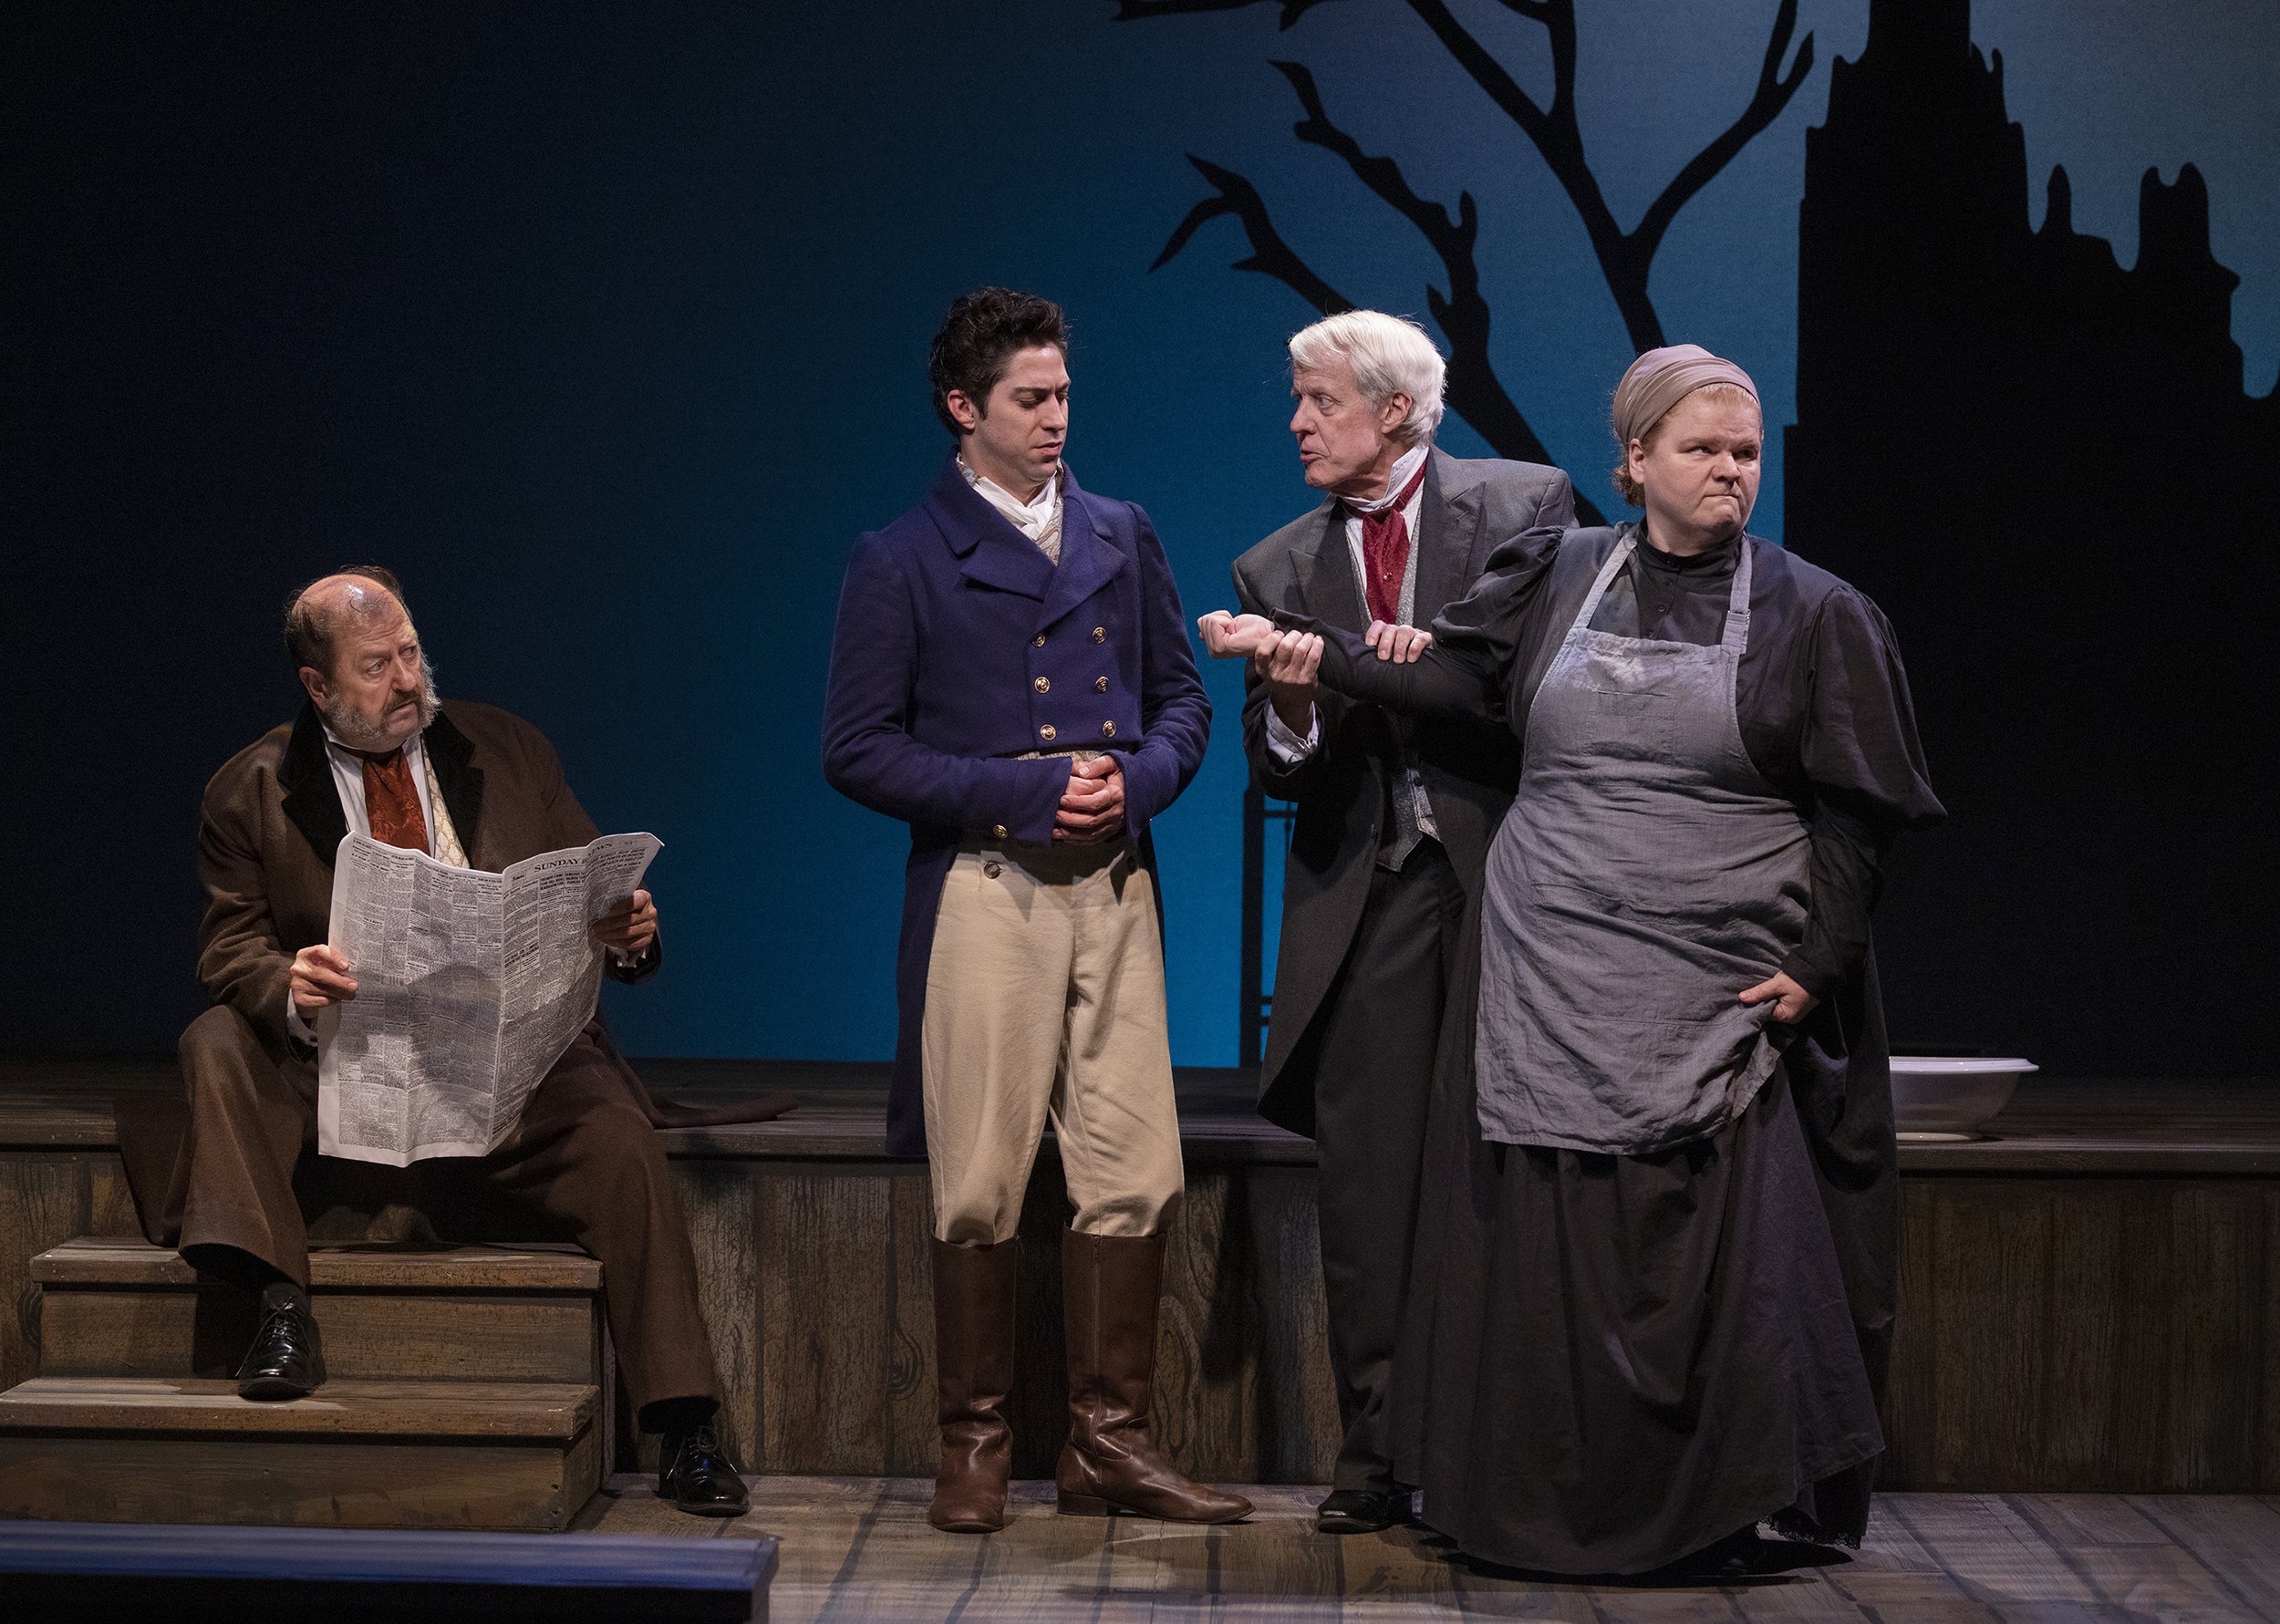 Dennis O’Dell as Wemmick, Hunter Hnat as Pip, Joseph McGrath as Magwitch and Gretchen Wirges as Molly. Photo by Tim Fuller.